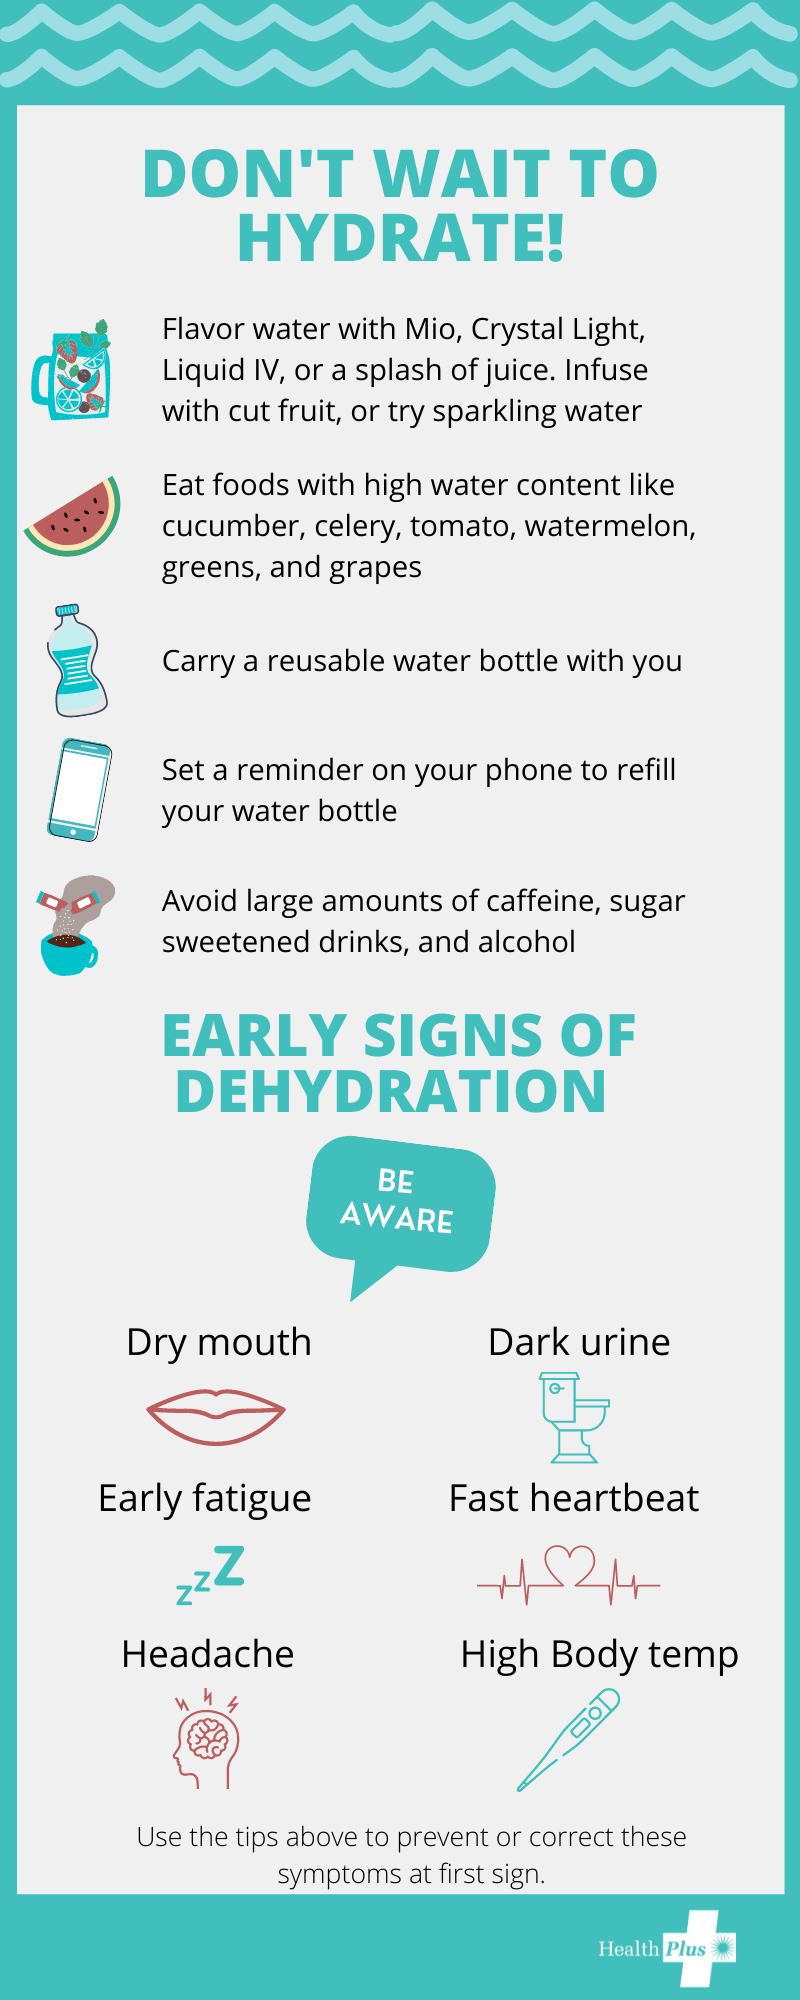 Don't Wait to Hydrate